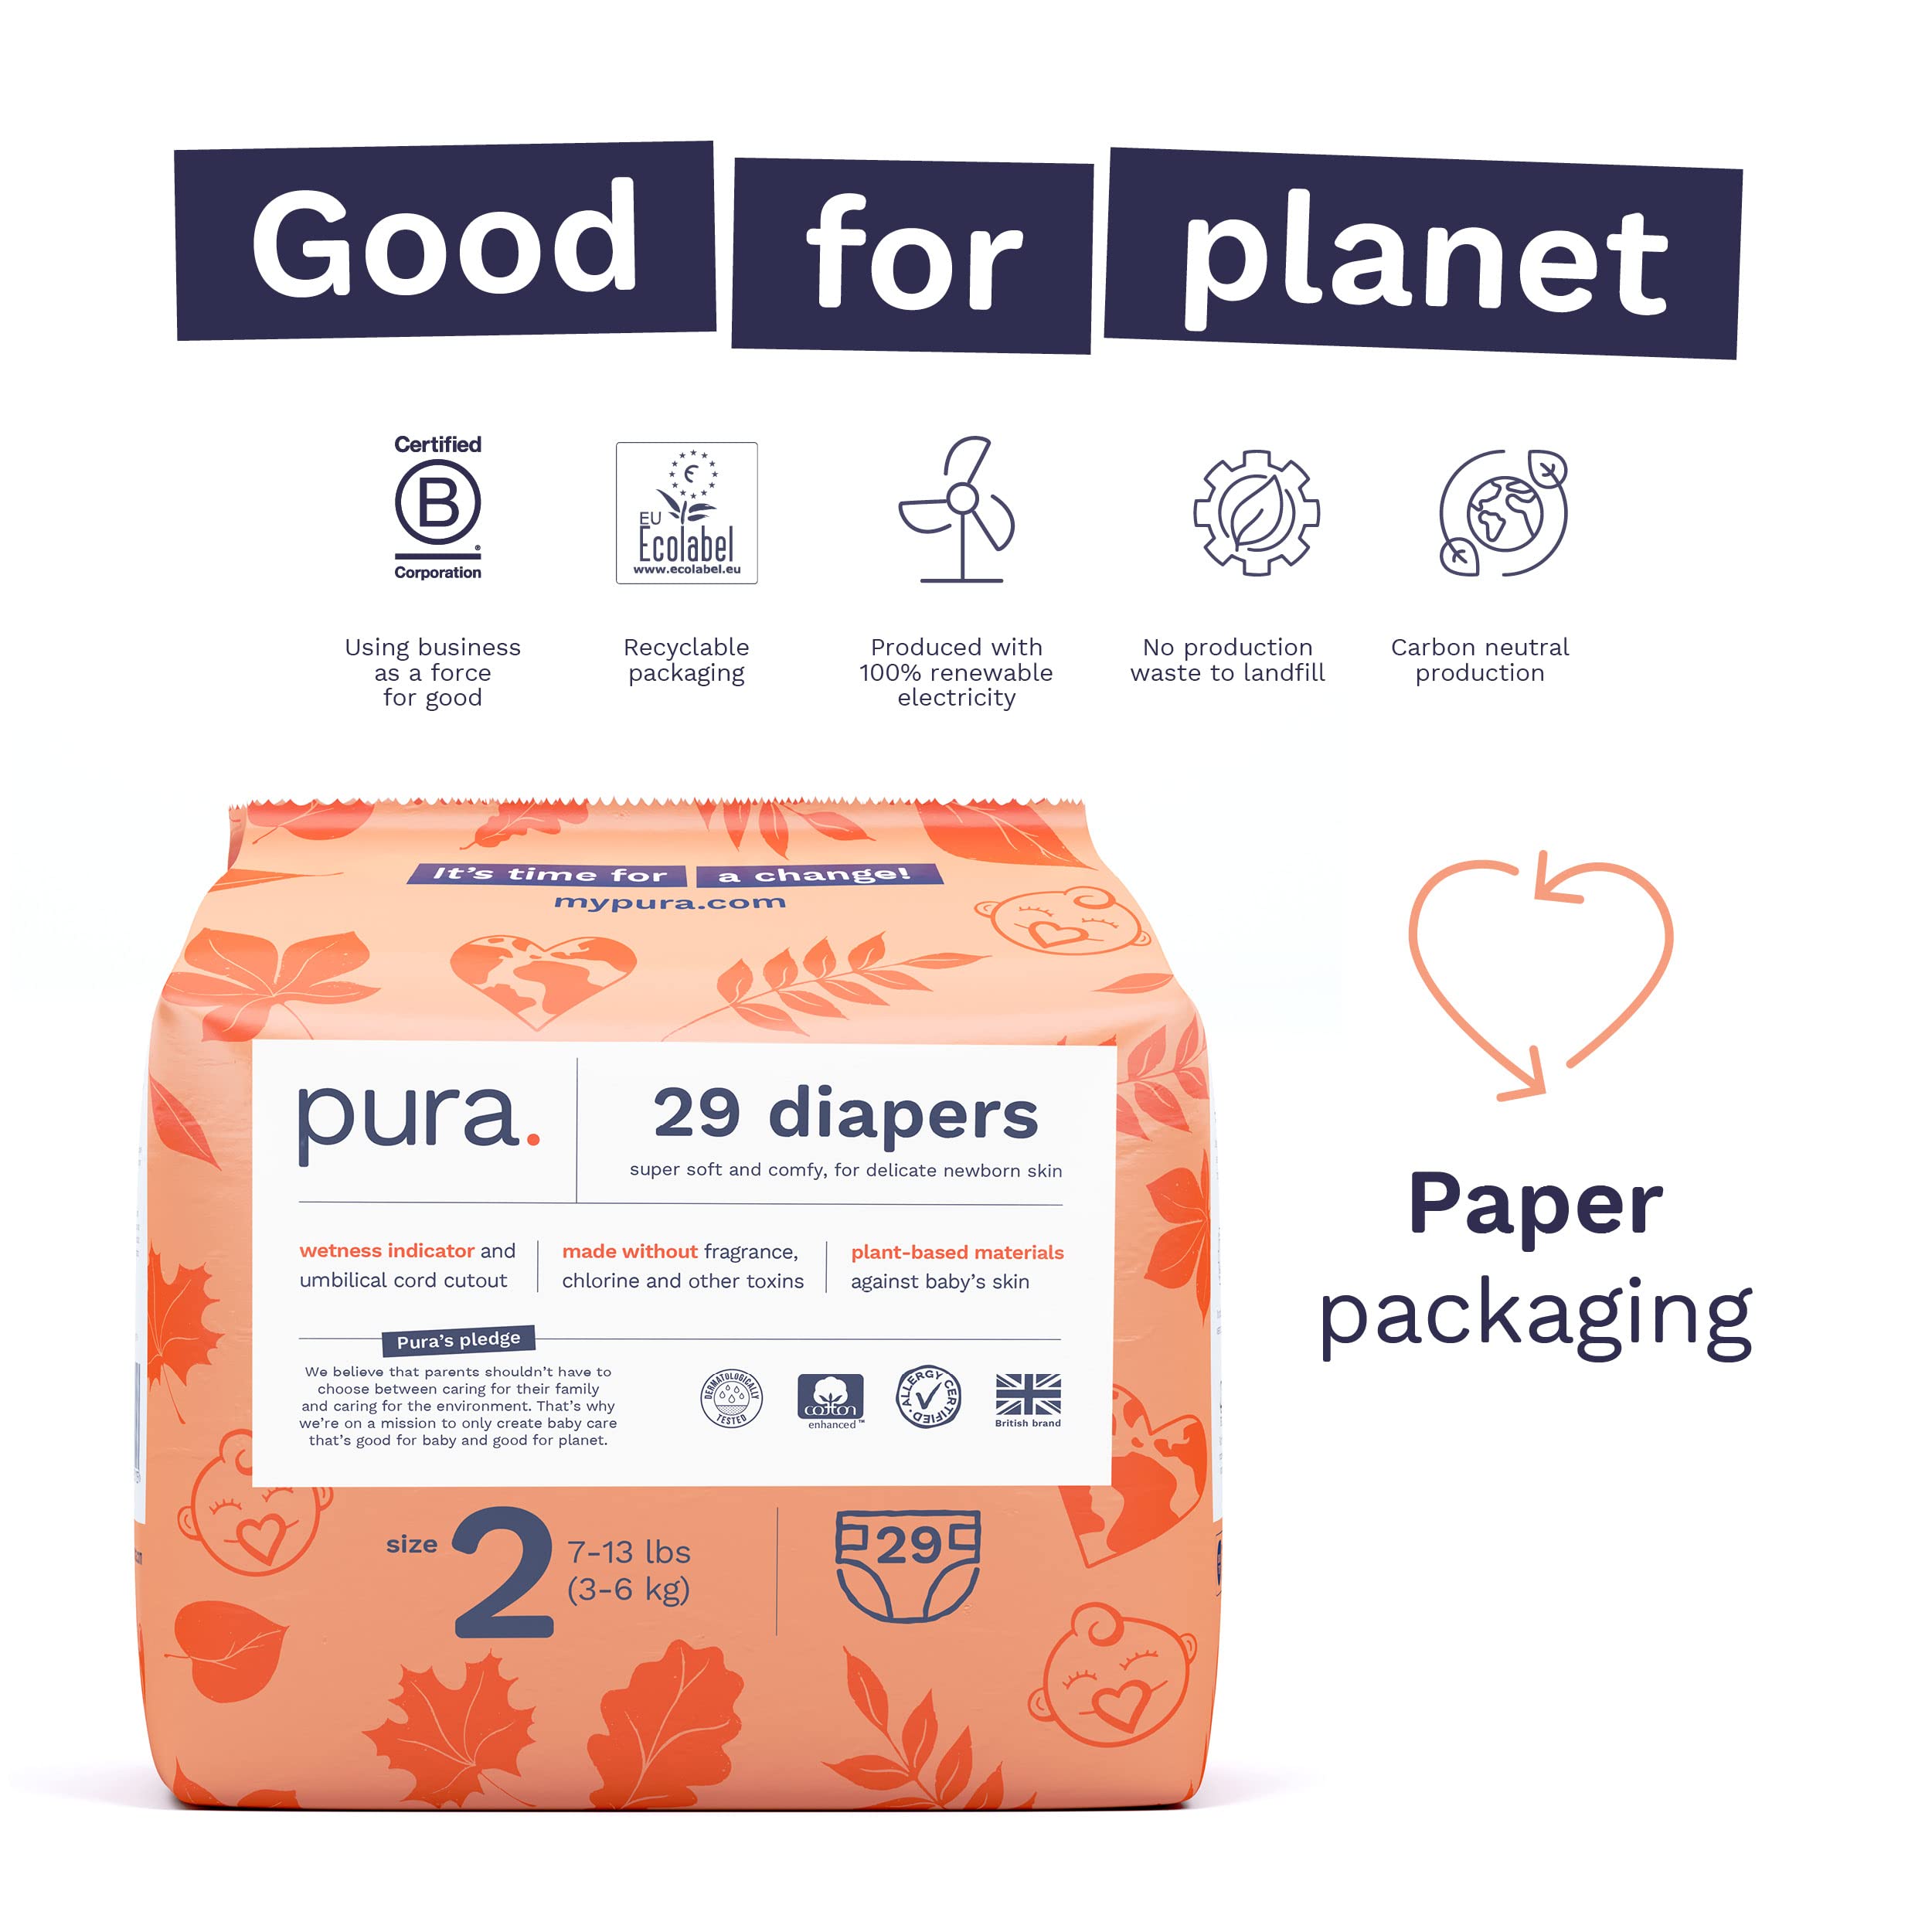 Pura Size 2 Eco-Friendly Diapers (7-13lbs) Hypoallergenic, Soft Organic Cotton Comfort, Sustainable, Wetness Indicator, Allergy UK, Recyclable Paper Packaging. 3 Packs of 29 (87 Baby Diapers)